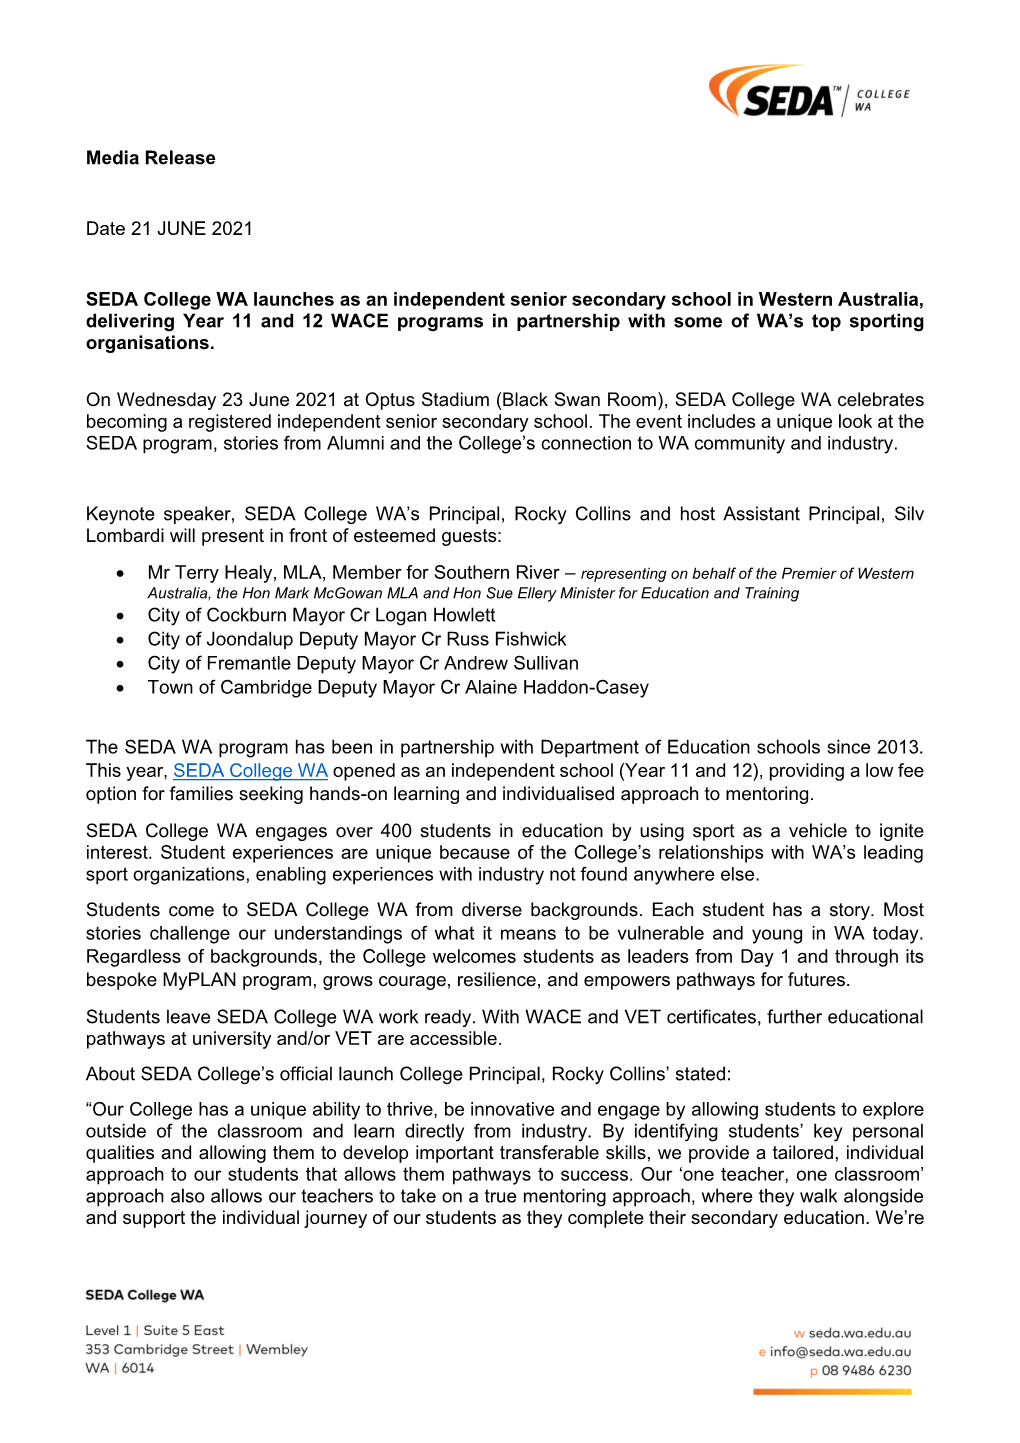 Media Release Date 21 JUNE 2021 SEDA College WA Launches As An